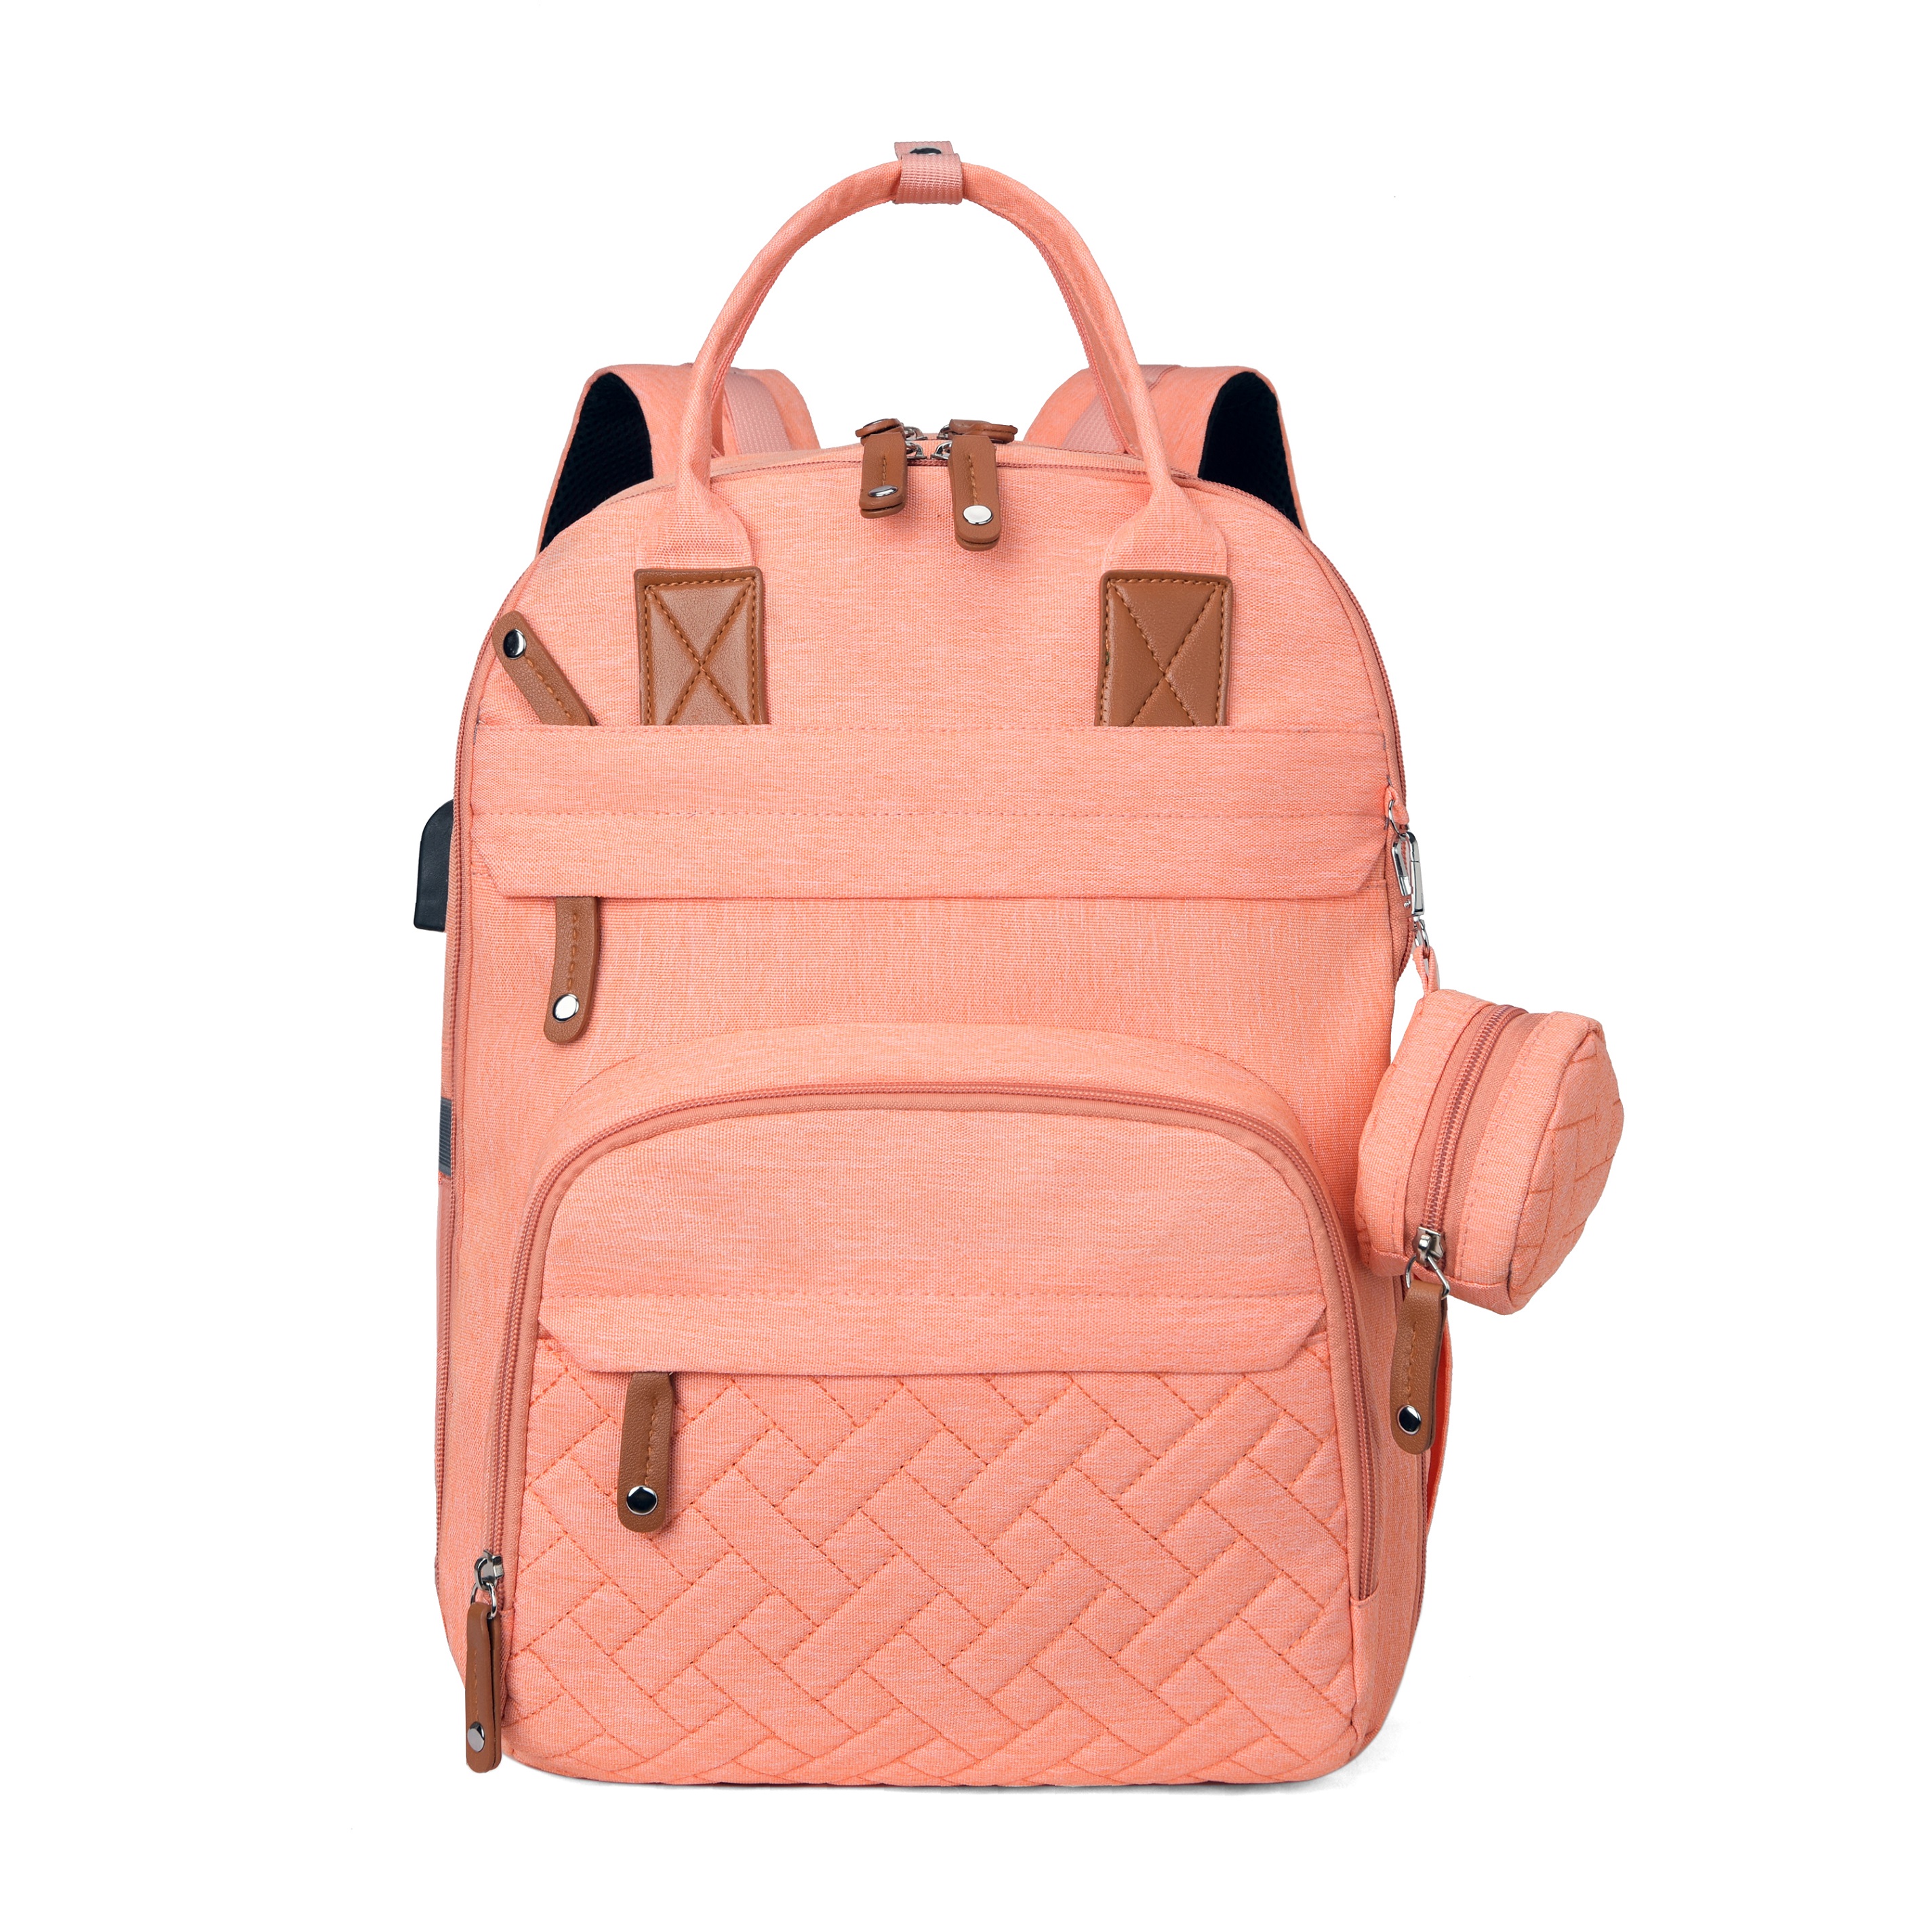 Matching Bag, Backpack & Purse Gift Ideas